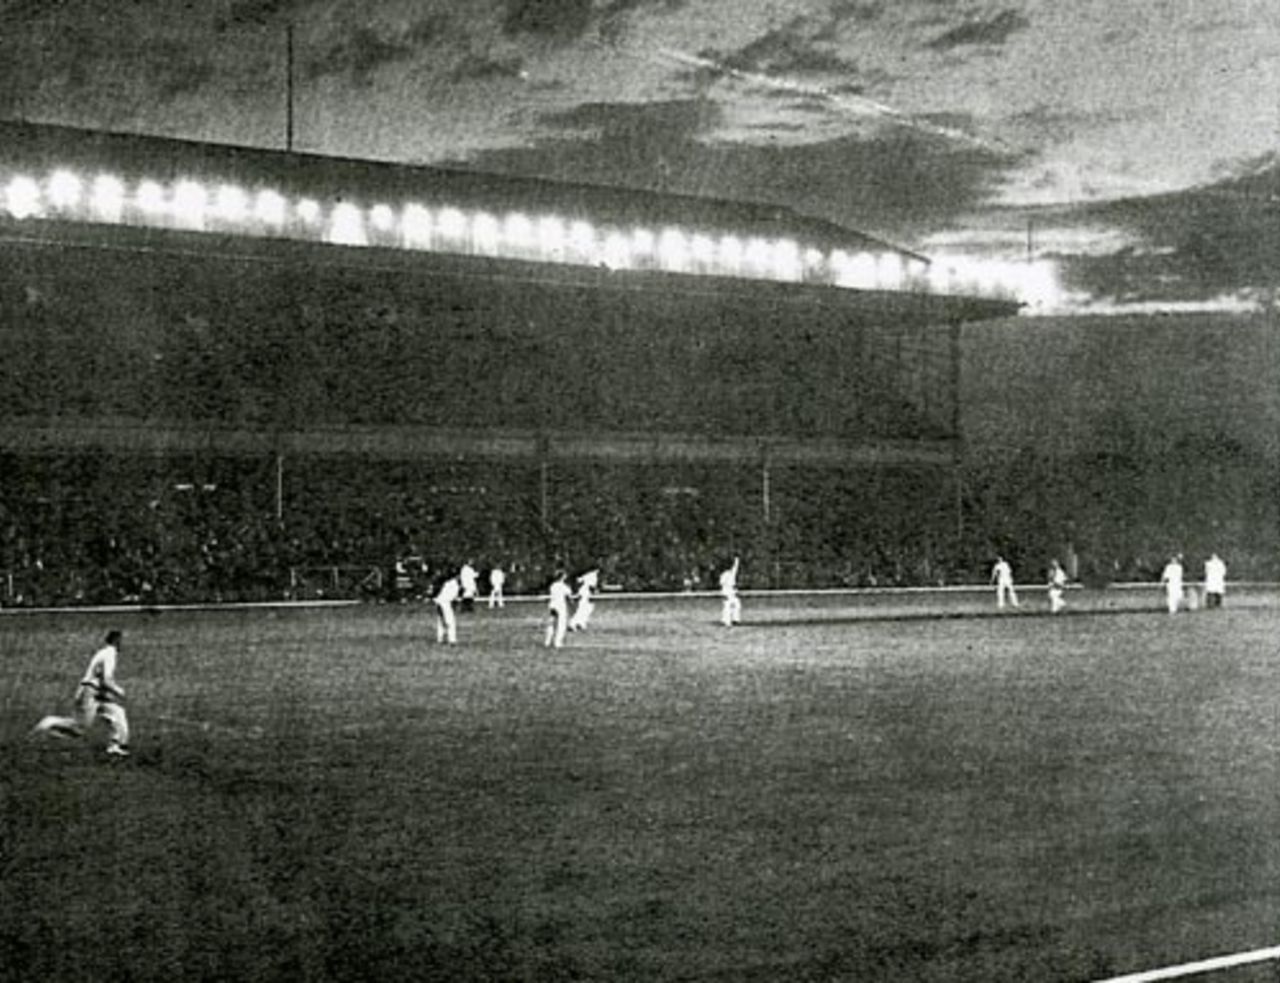 Action from the world's first floodlit match between Arsenal and Middlesex at Arsenal's Highbury ground, August 11, 1952